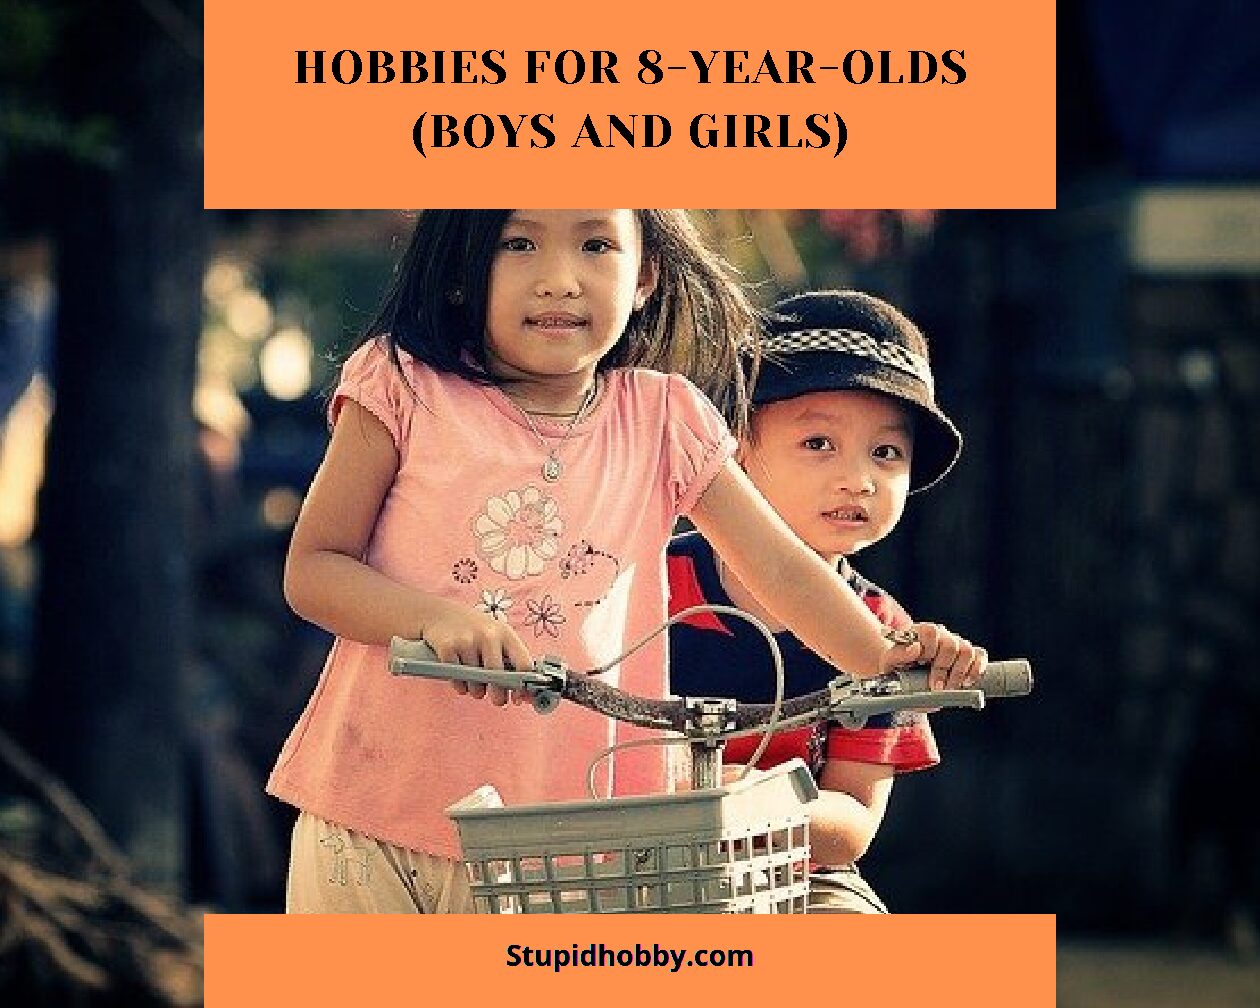 Hobbies For 8-Year-Olds (Boys and Girls)